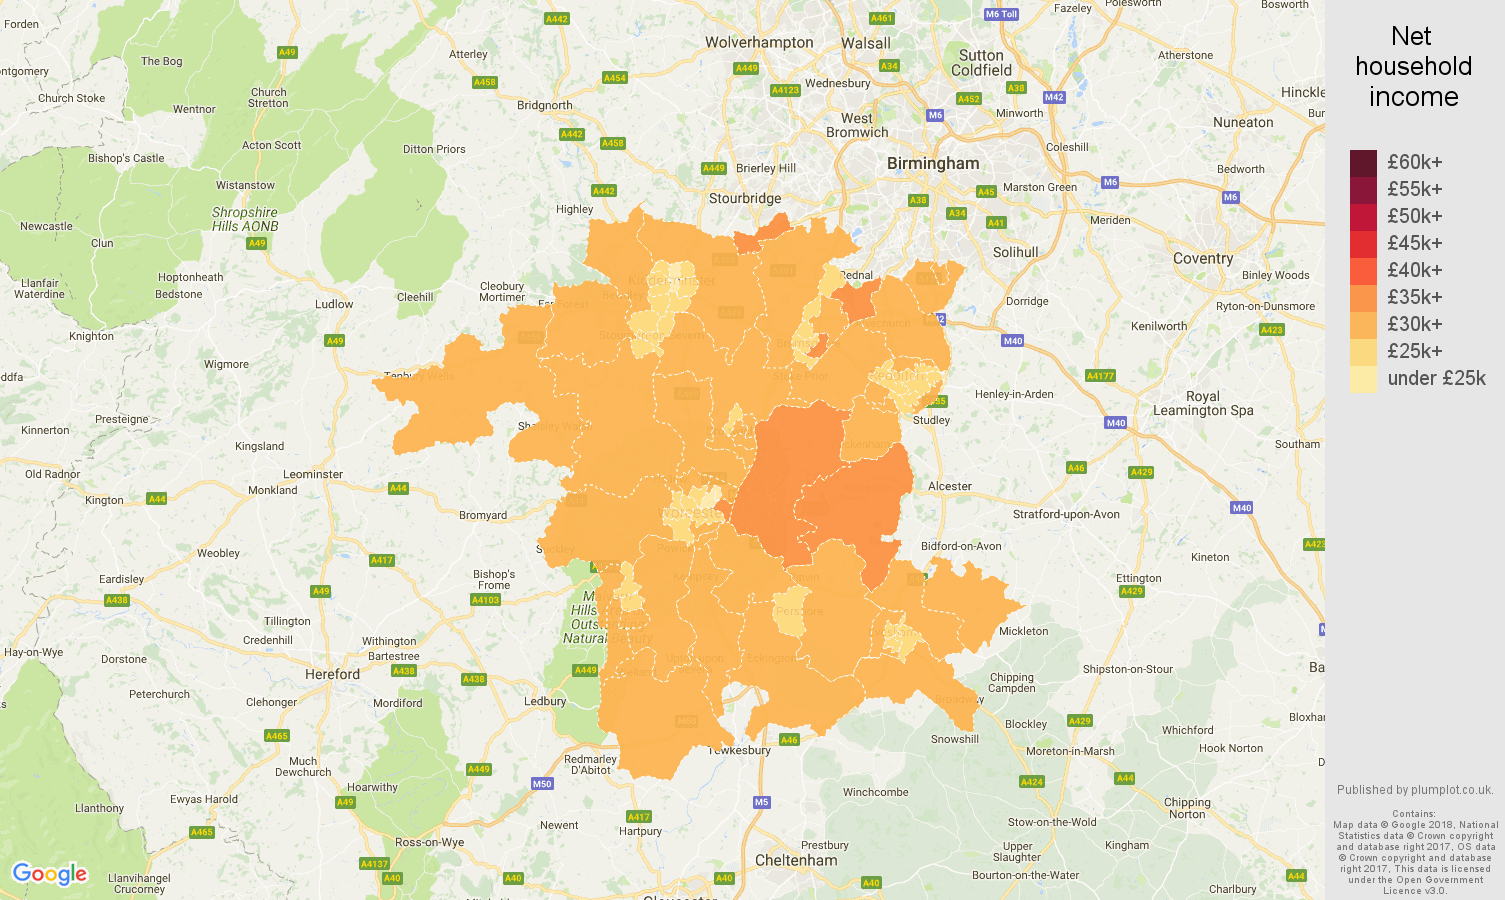 Worcestershire net household income map